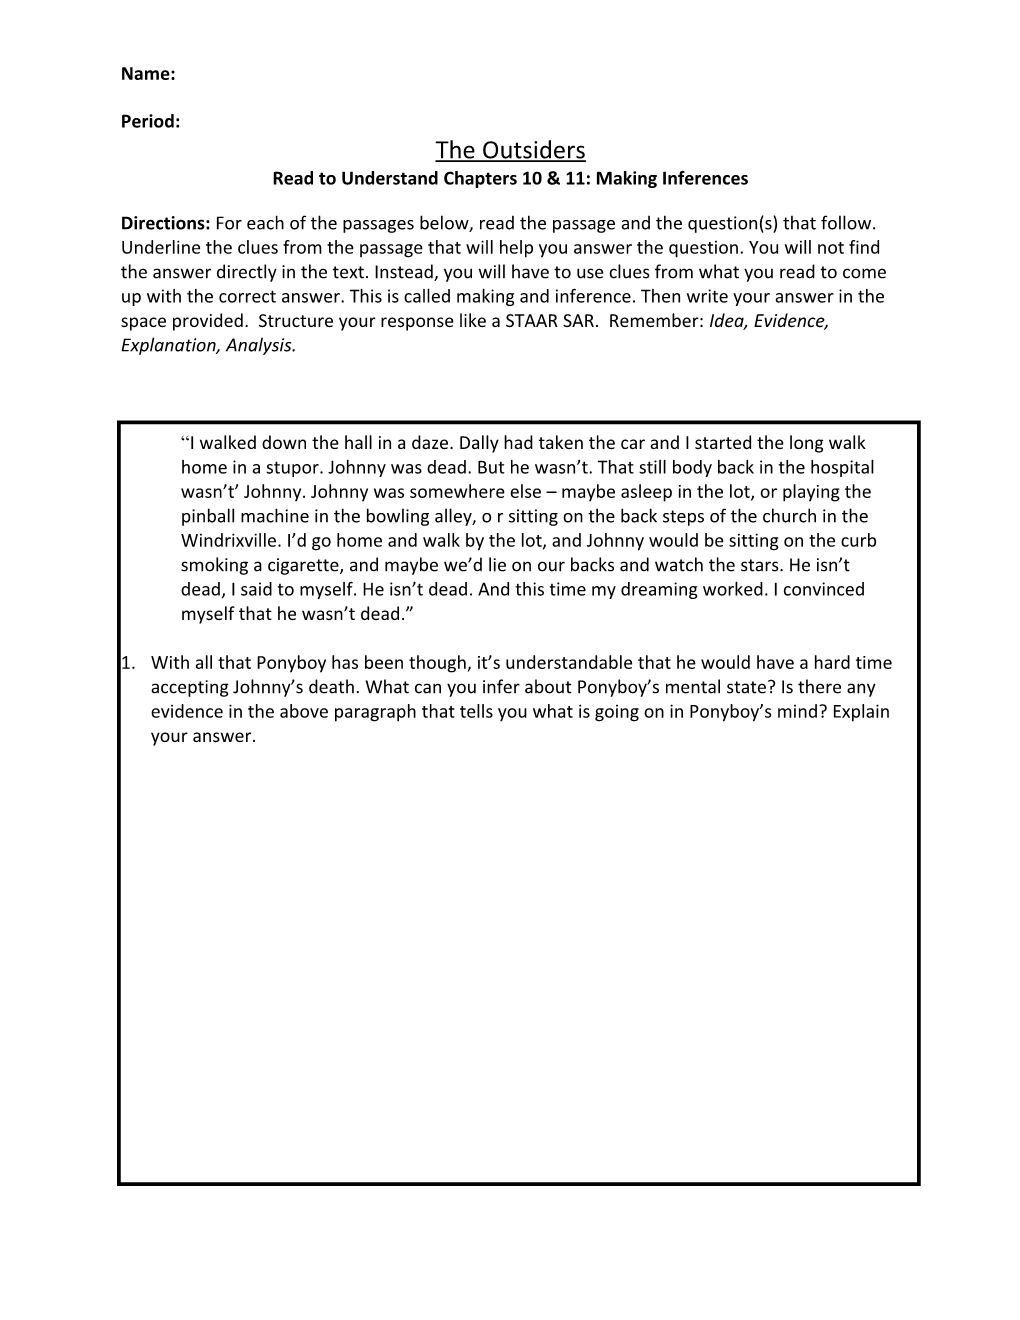 Read to Understand Chapters 10 & 11: Making Inferences